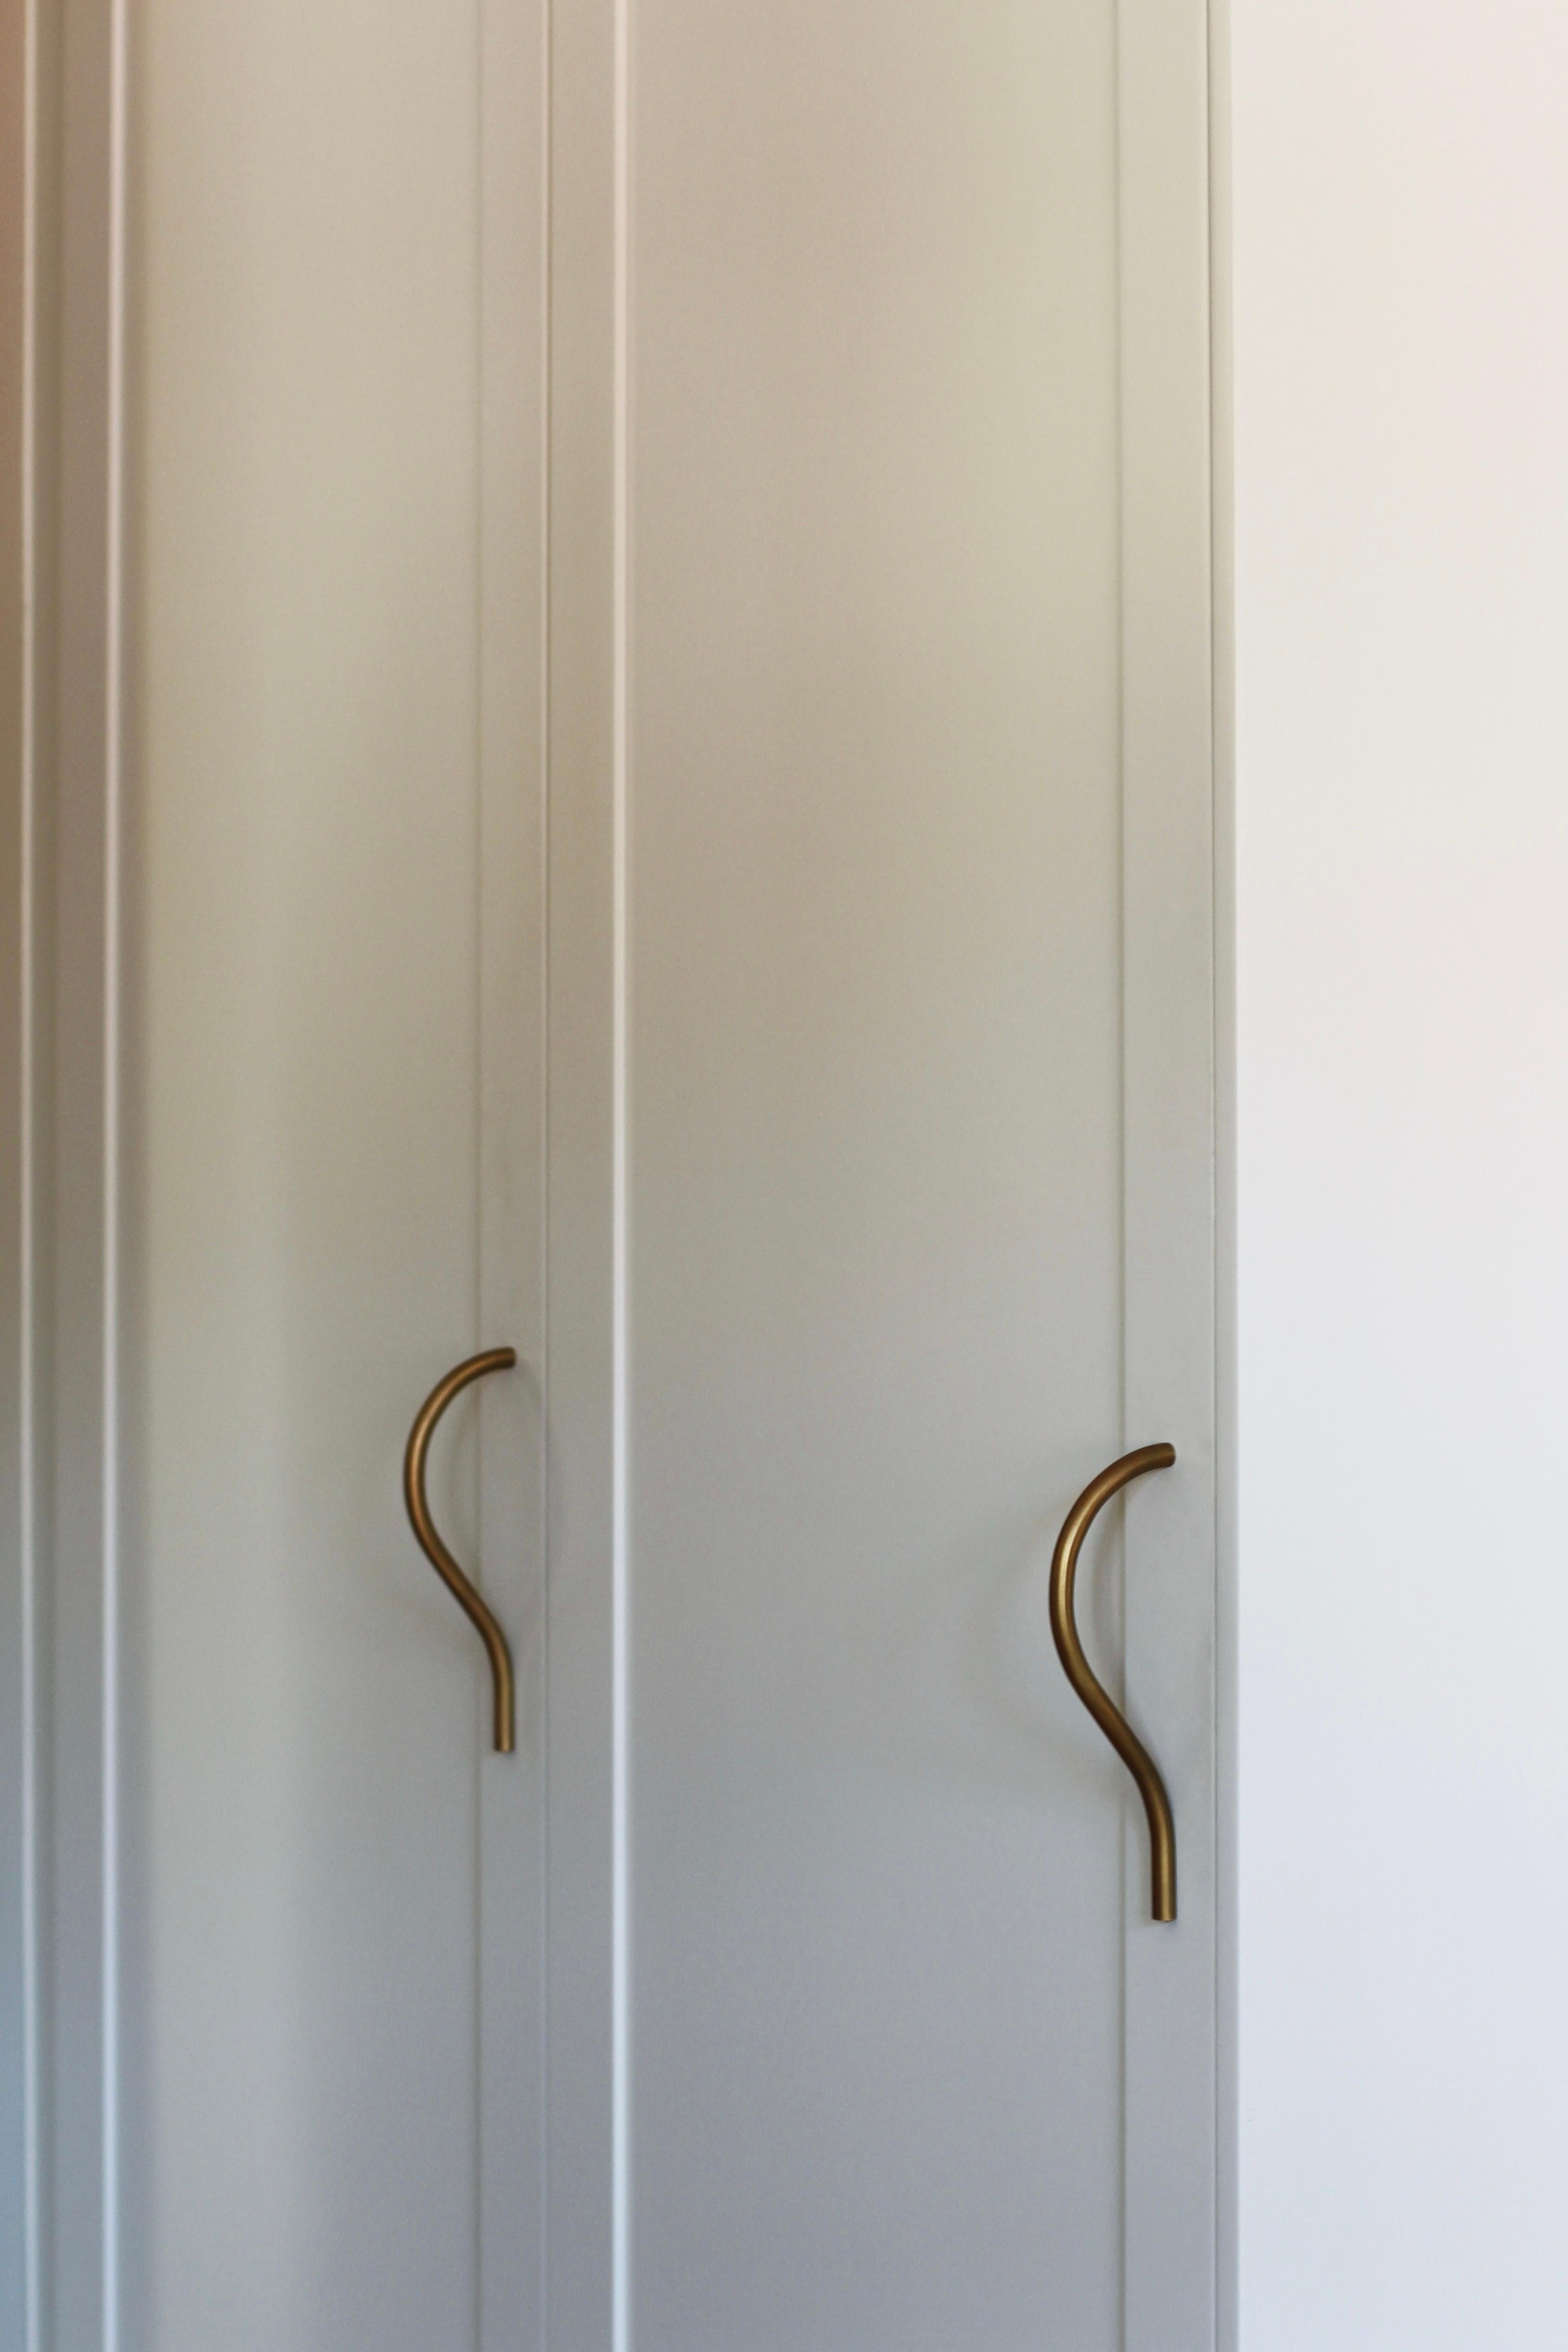 Door Handle or Knob 'Doyen' by Spaces Within, Amber Brass

Dimensions
Height: 230 mm
Width: 12 mm
Depth: 70 mm

Weight: 300 g

DOYEN is a prominent handle with an elegantly slanted curve. This larger handle is beautiful as a statement piece on tall